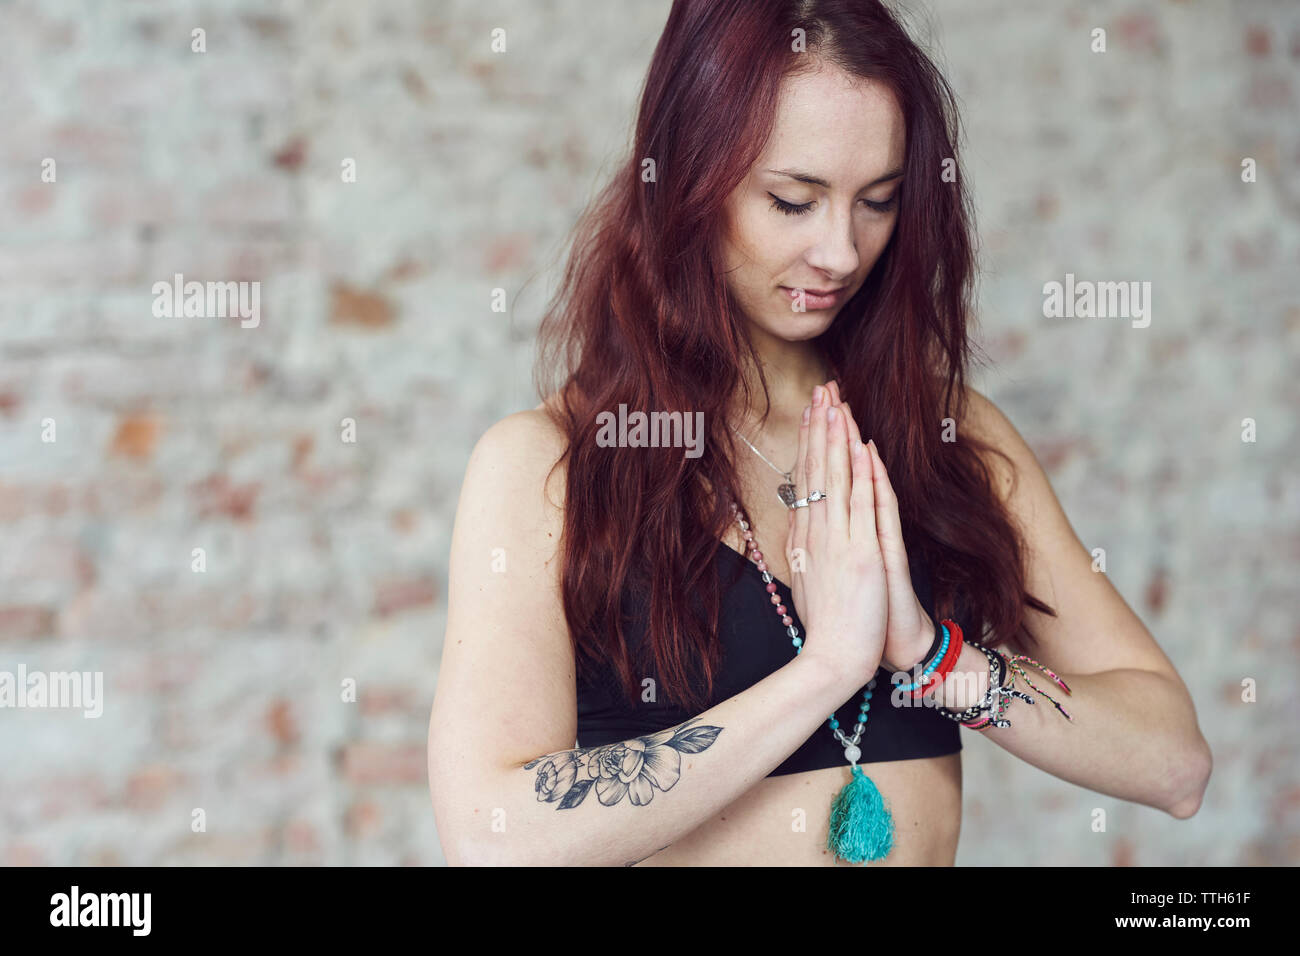 Young female in yoga pose with eyes closed by the brick wall Stock Photo